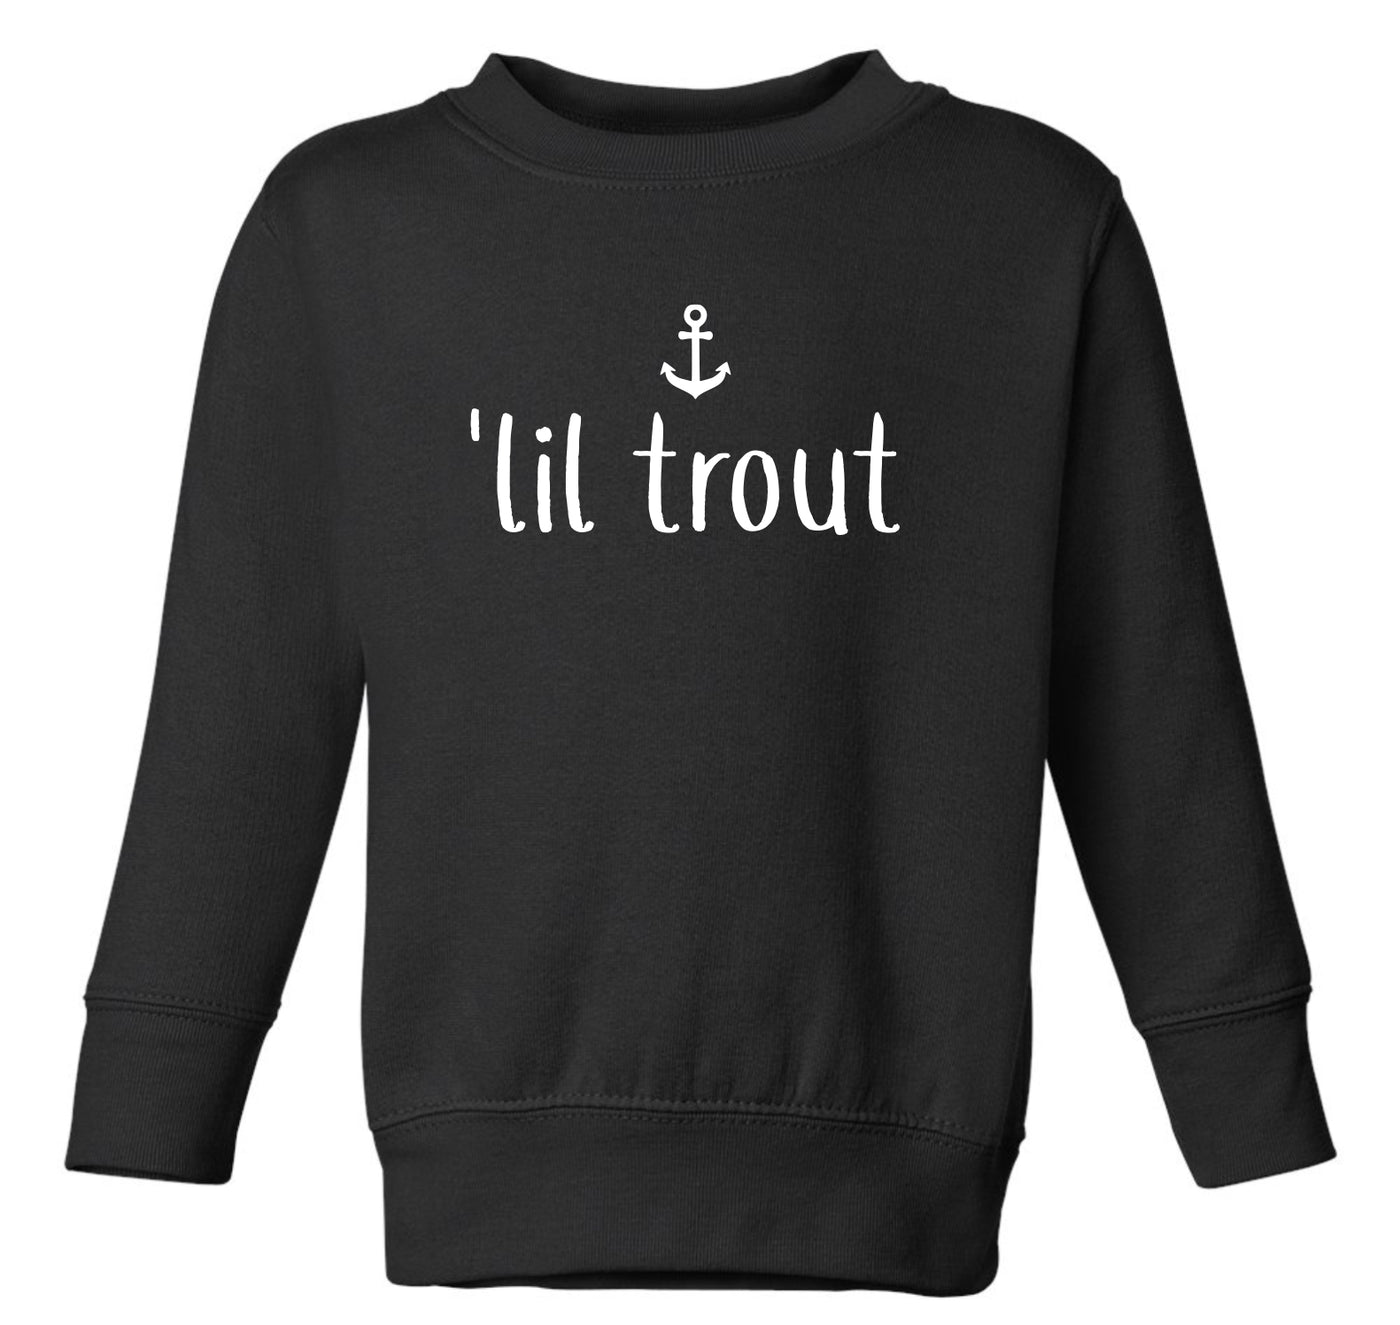 "Lil Trout" Toddler/Youth Crewneck Sweatshirt